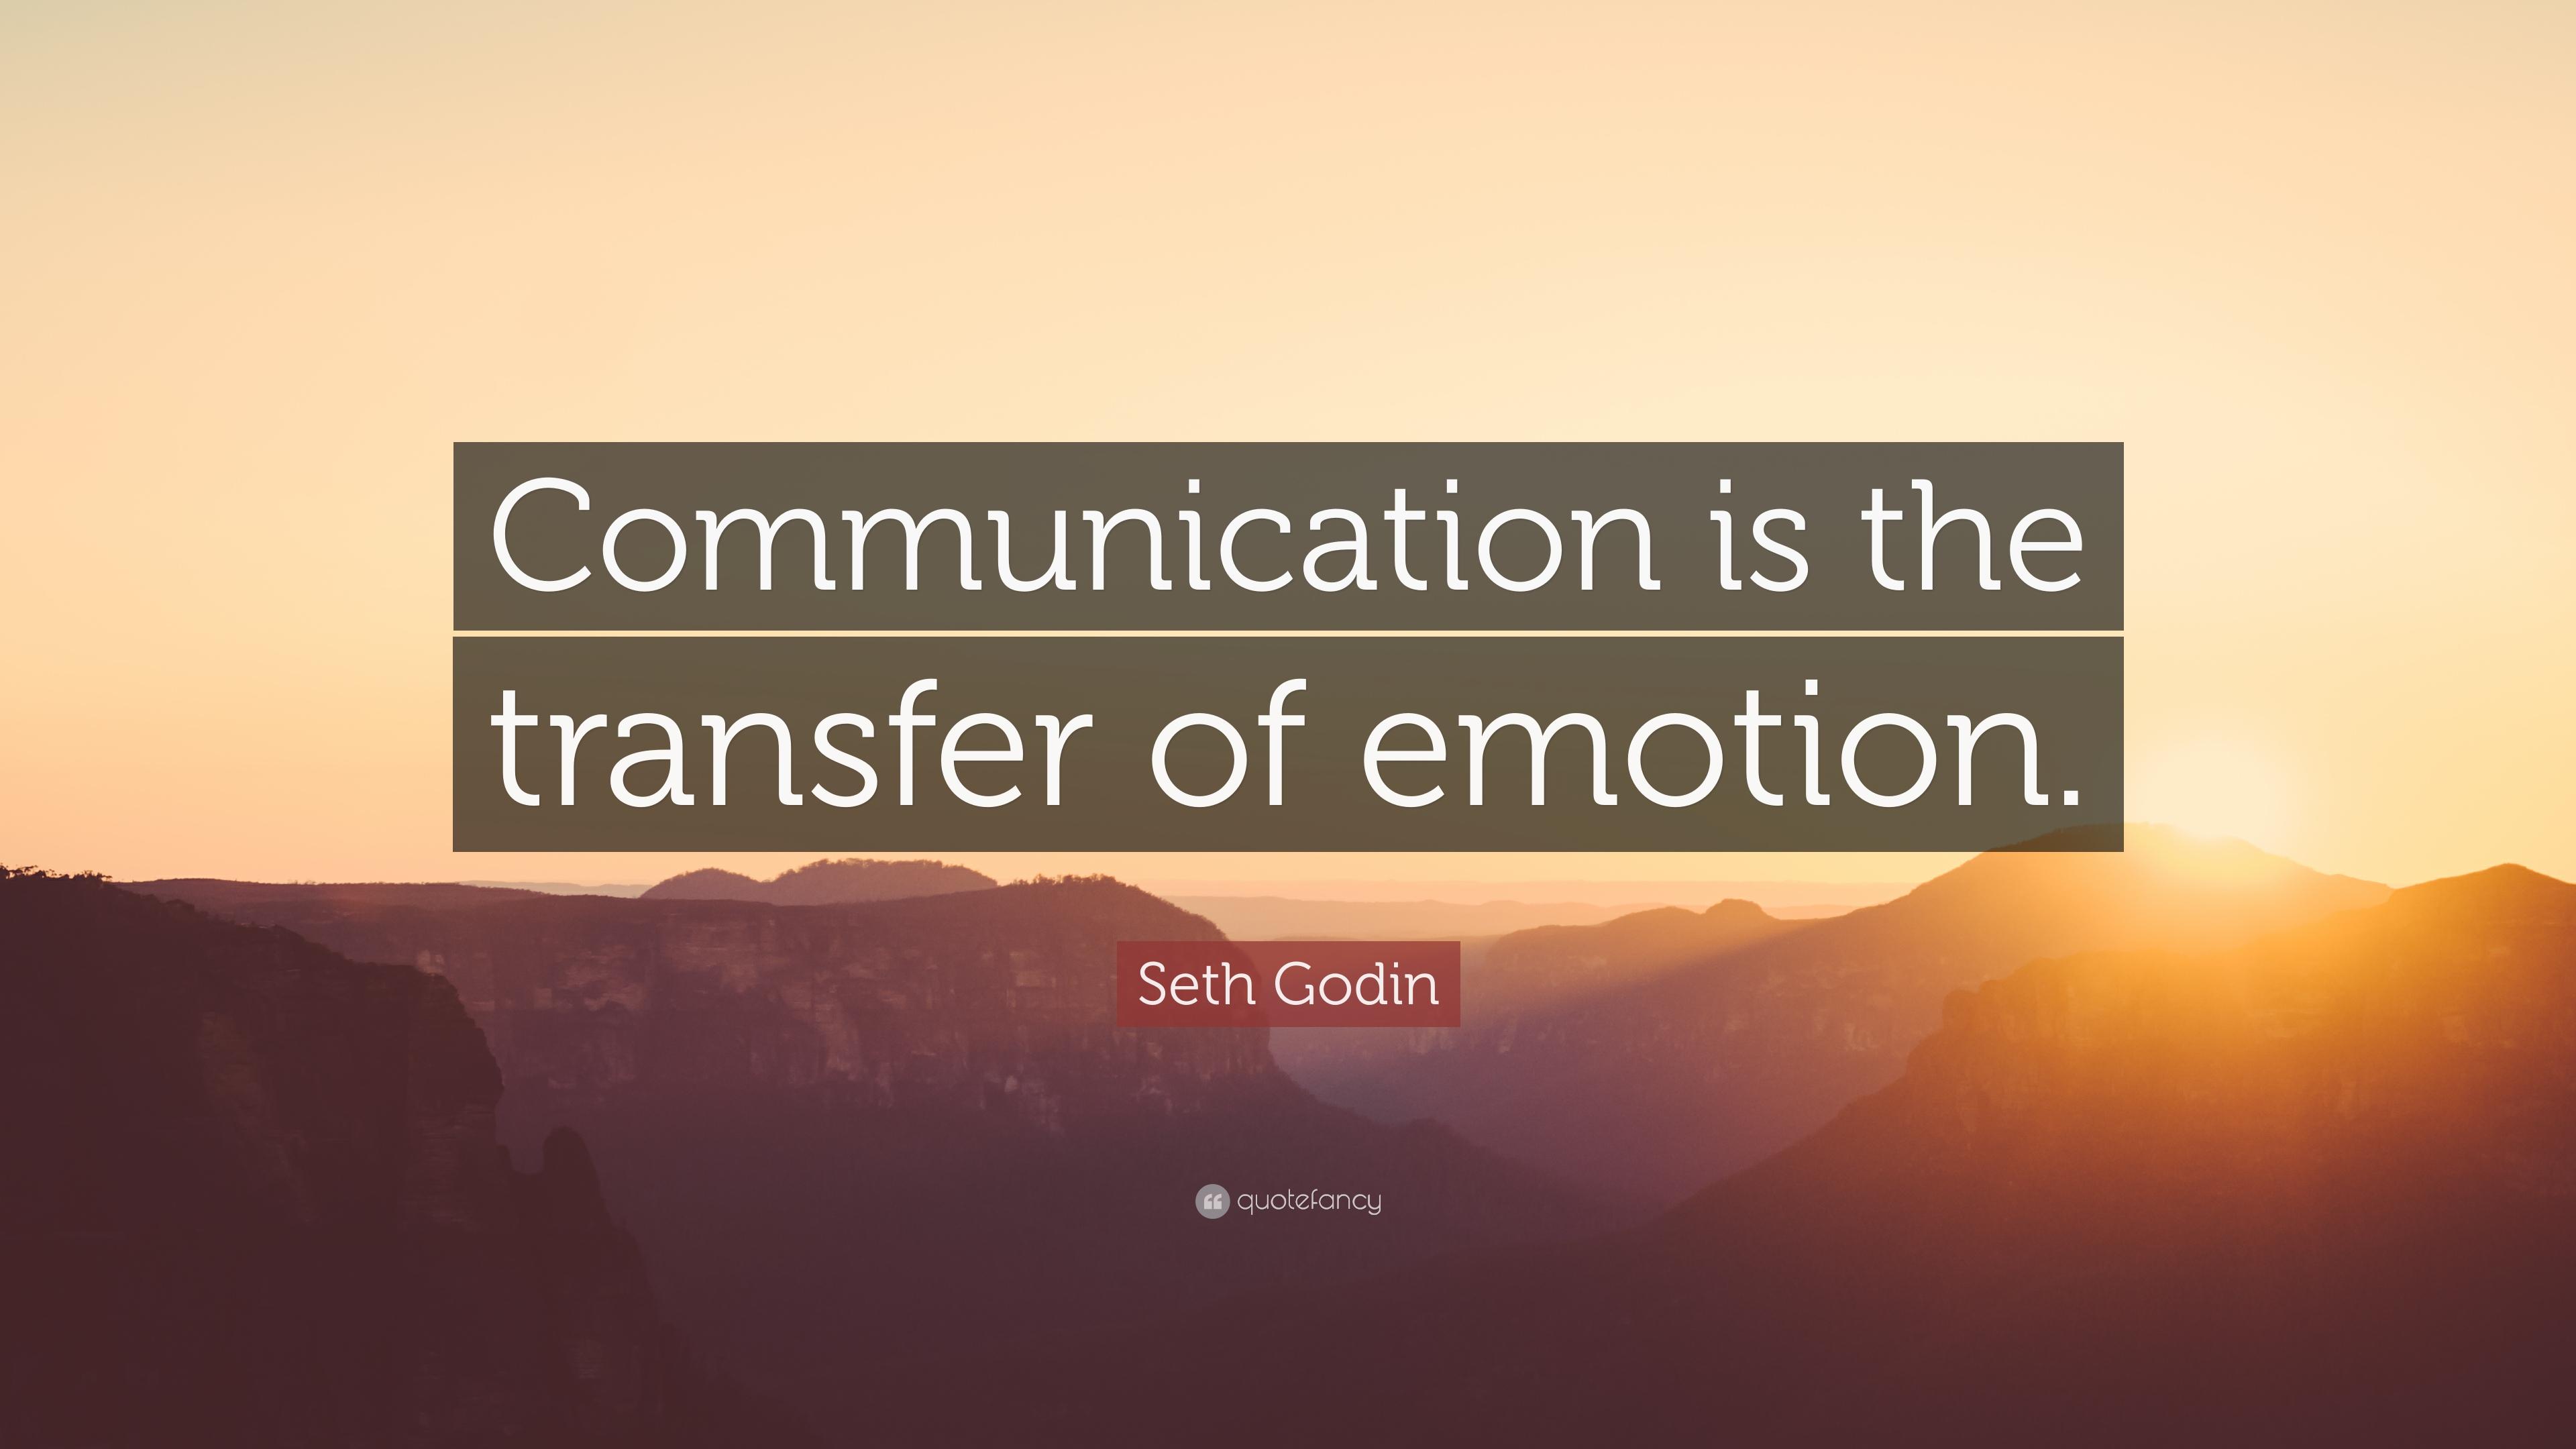 Seth Godin Quote: “Communication is the transfer of emotion